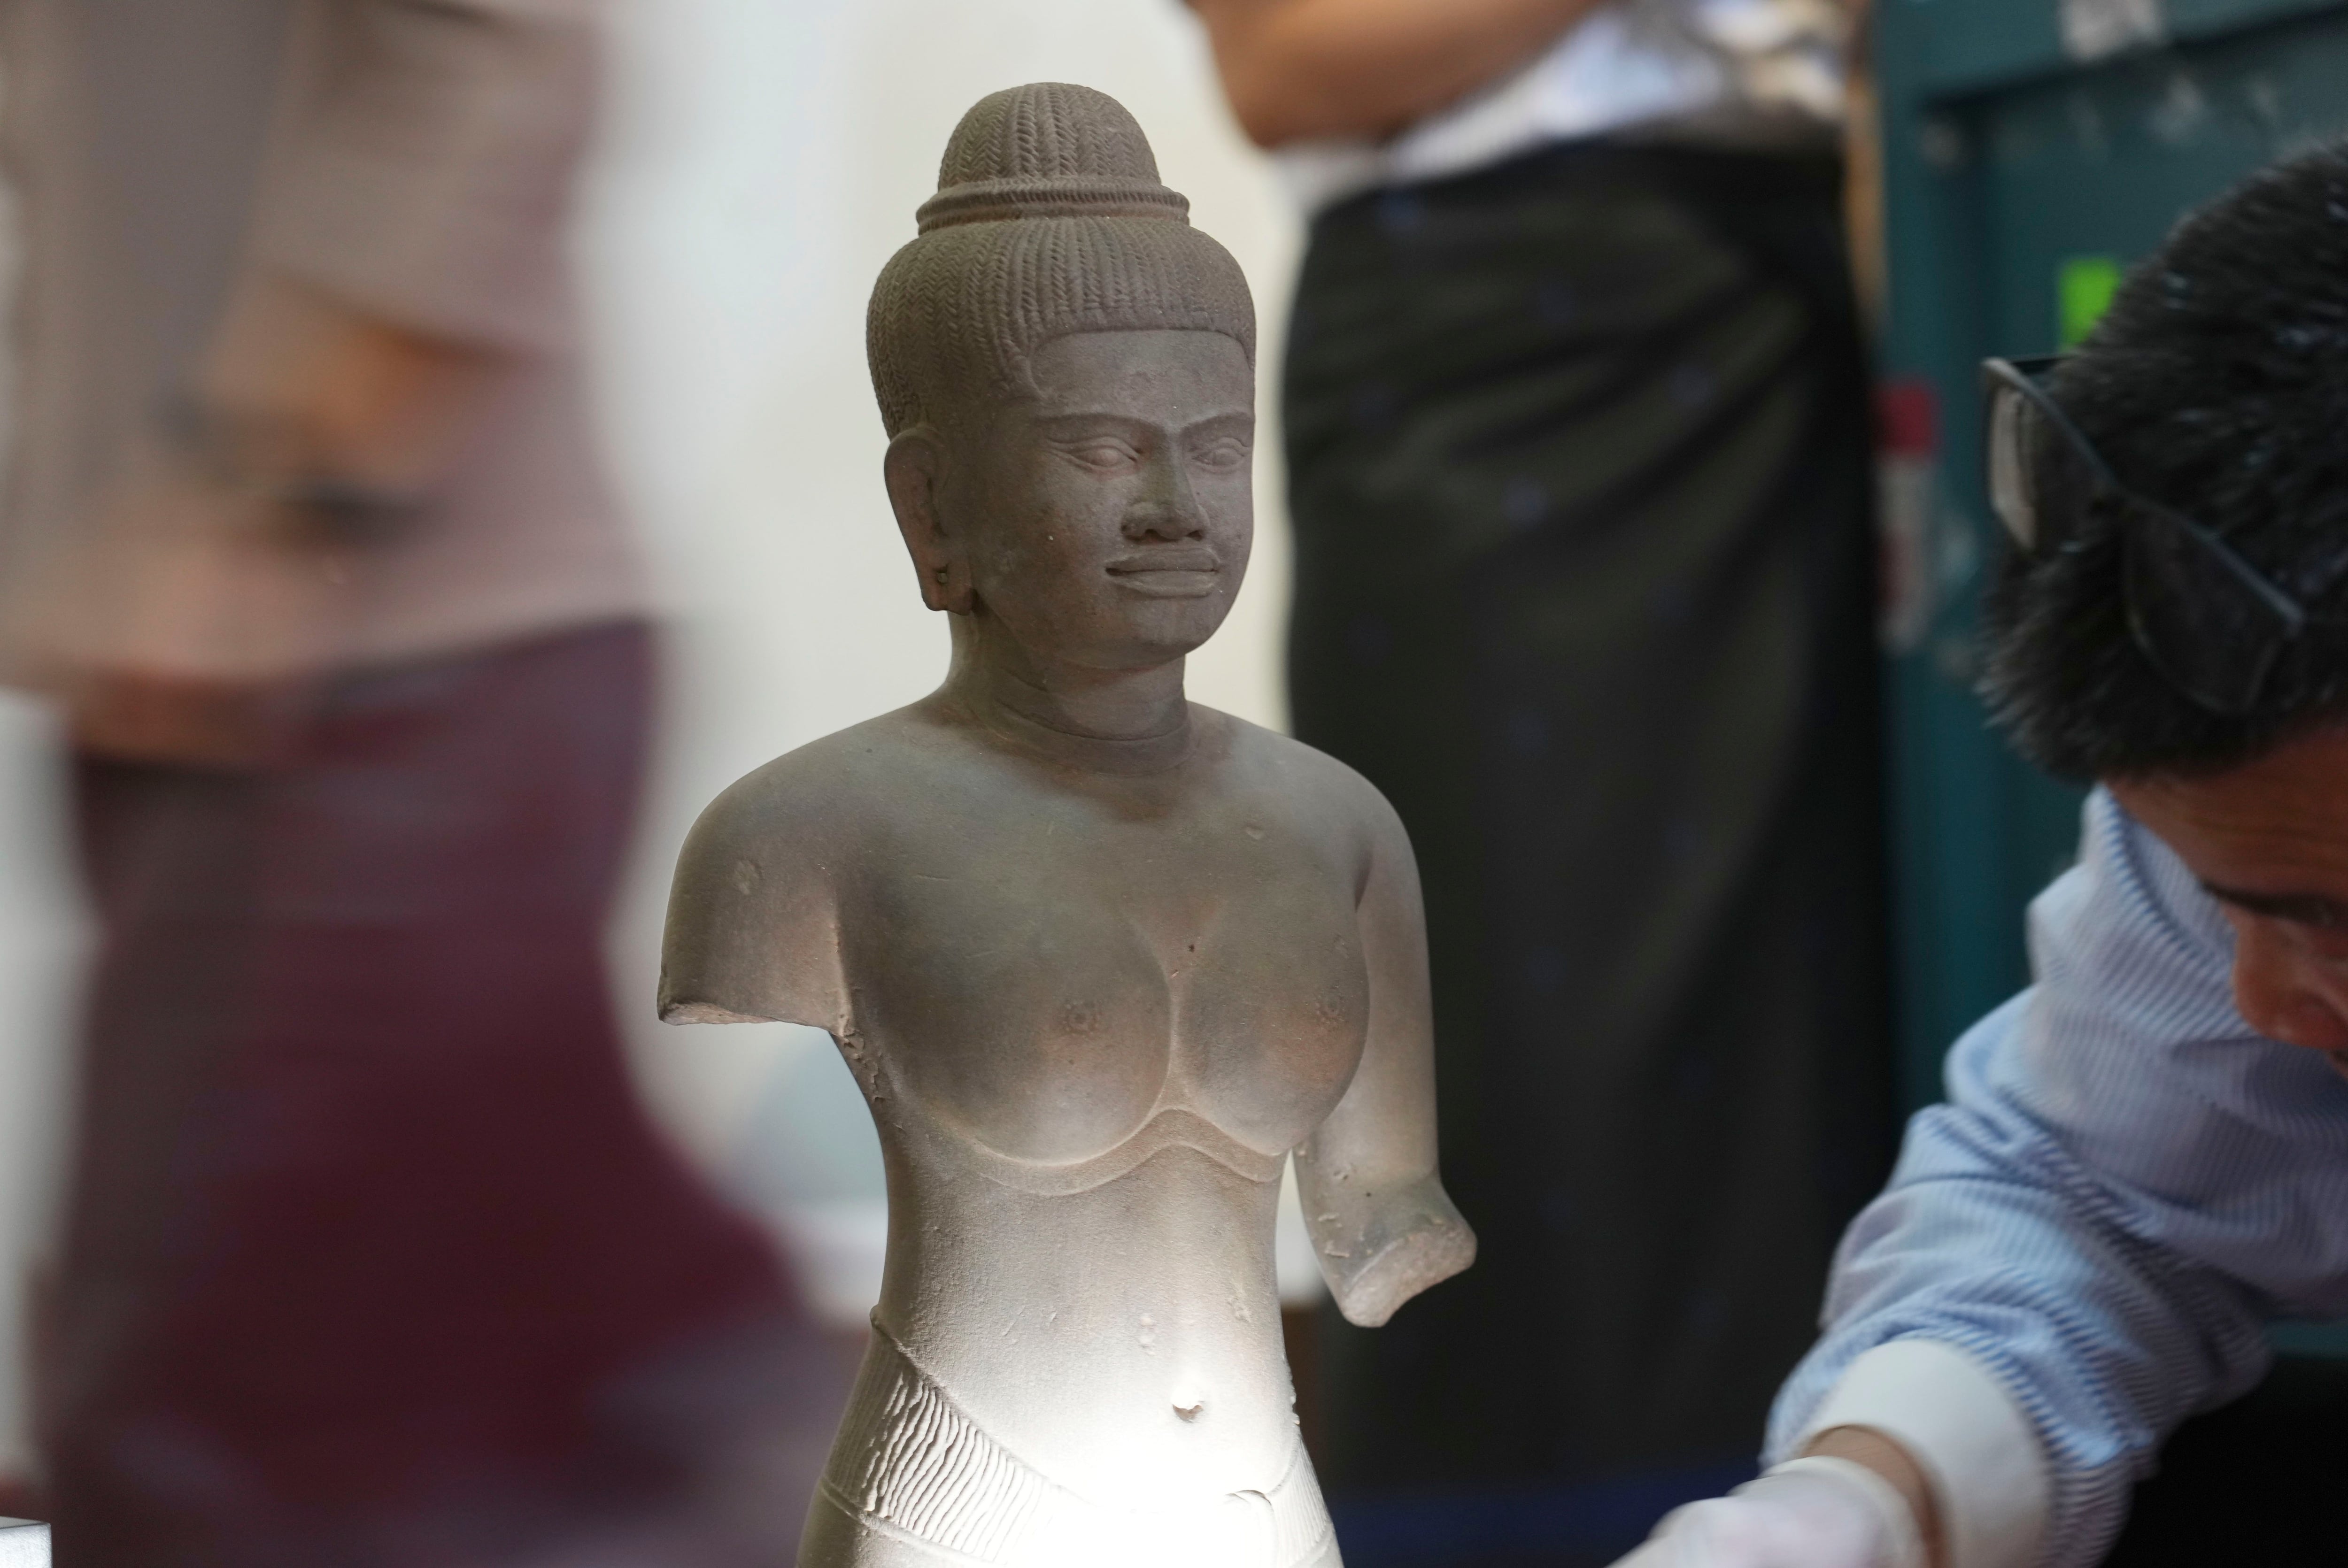 Cambodia welcomes the Metropolitan Museum's repatriation of statues looted over decades of turmoil thumbnail